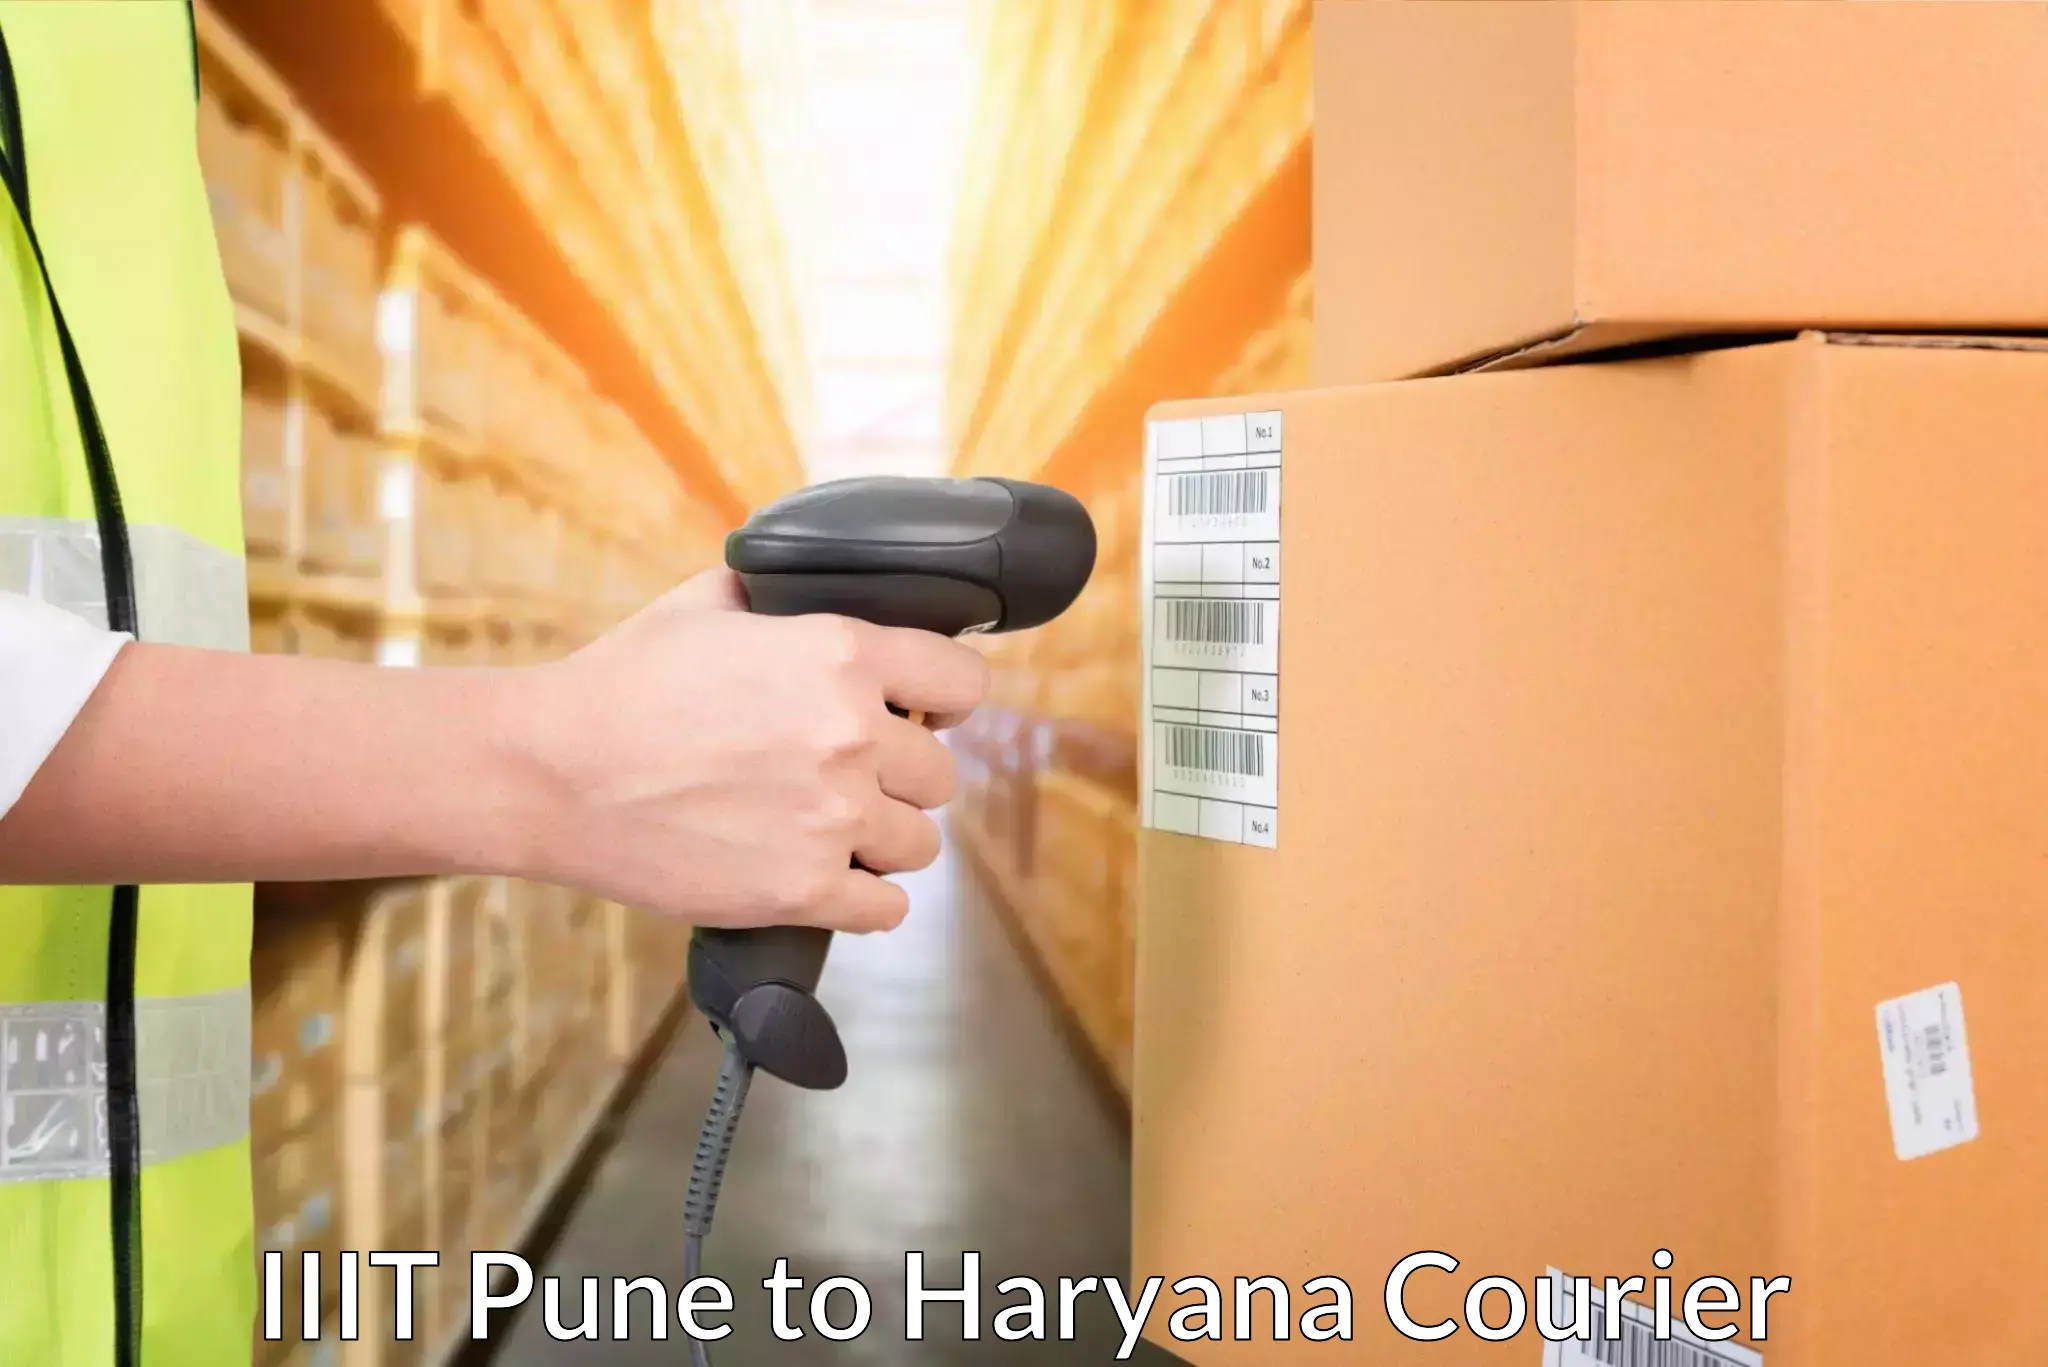 Business delivery service IIIT Pune to Haryana